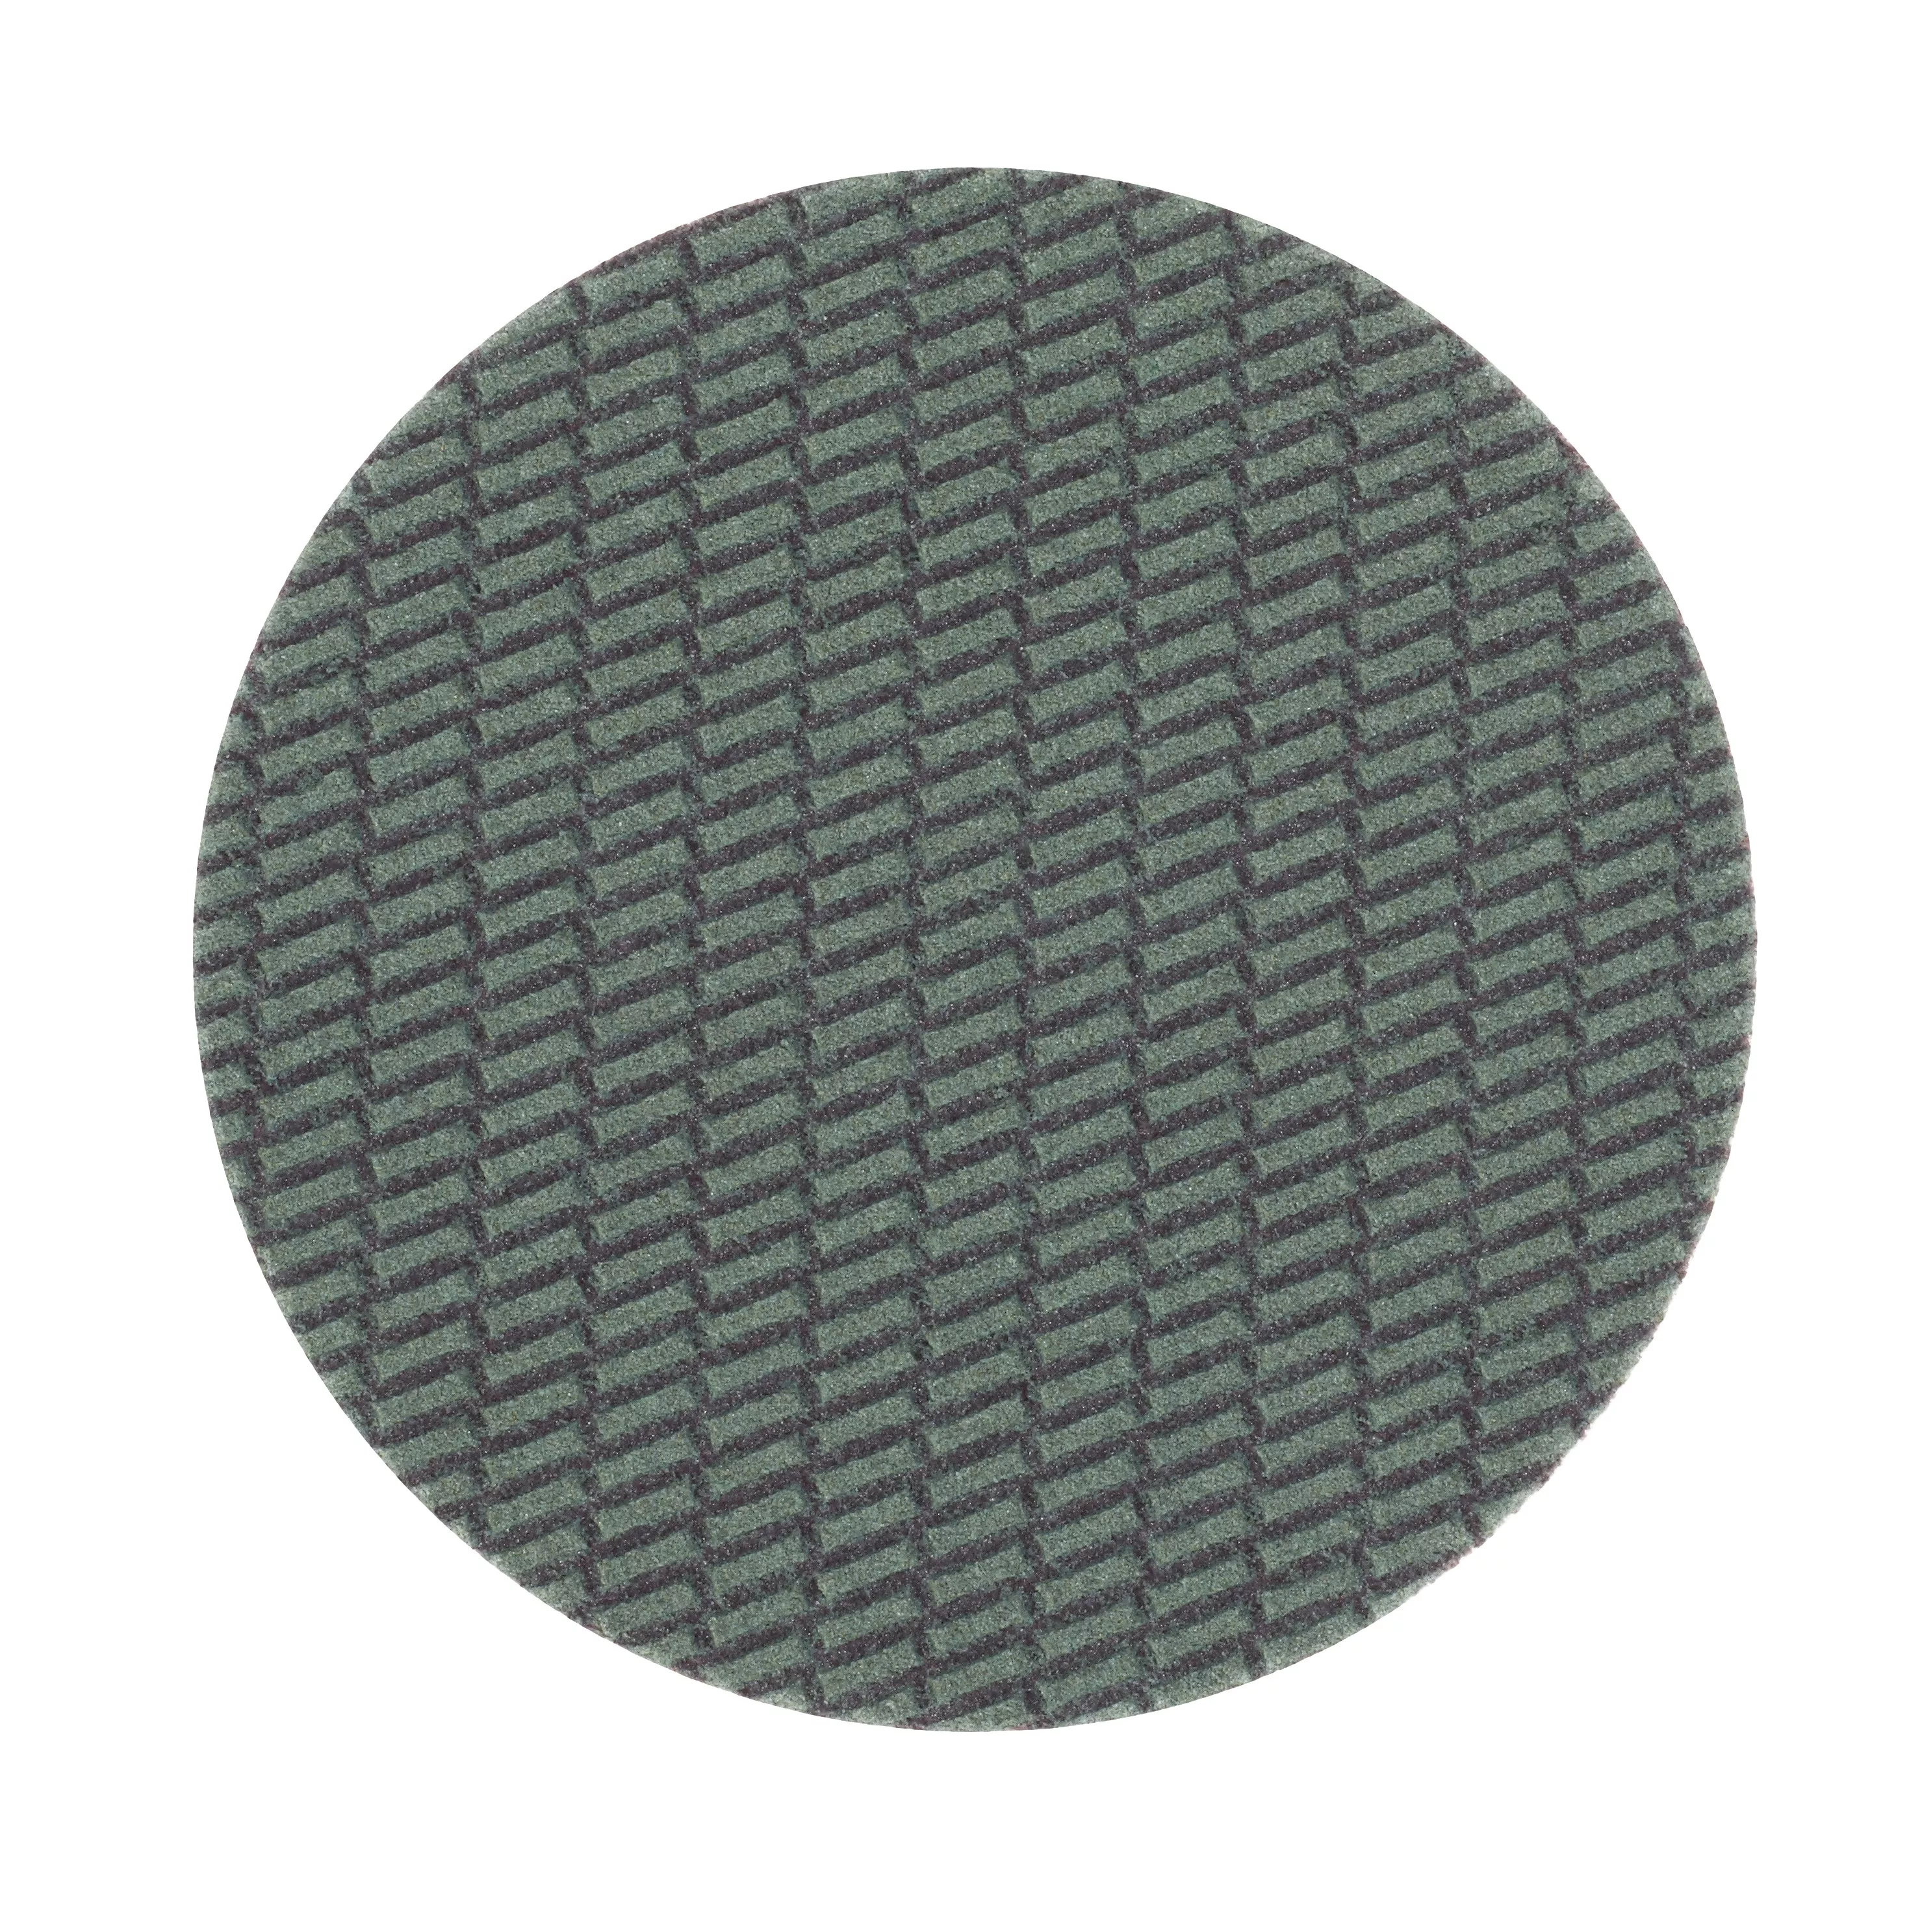 3M™ Trizact™ Hookit™ Cloth Disc 337DC, 6 in x NH, A160 X-weight, 50
ea/Case